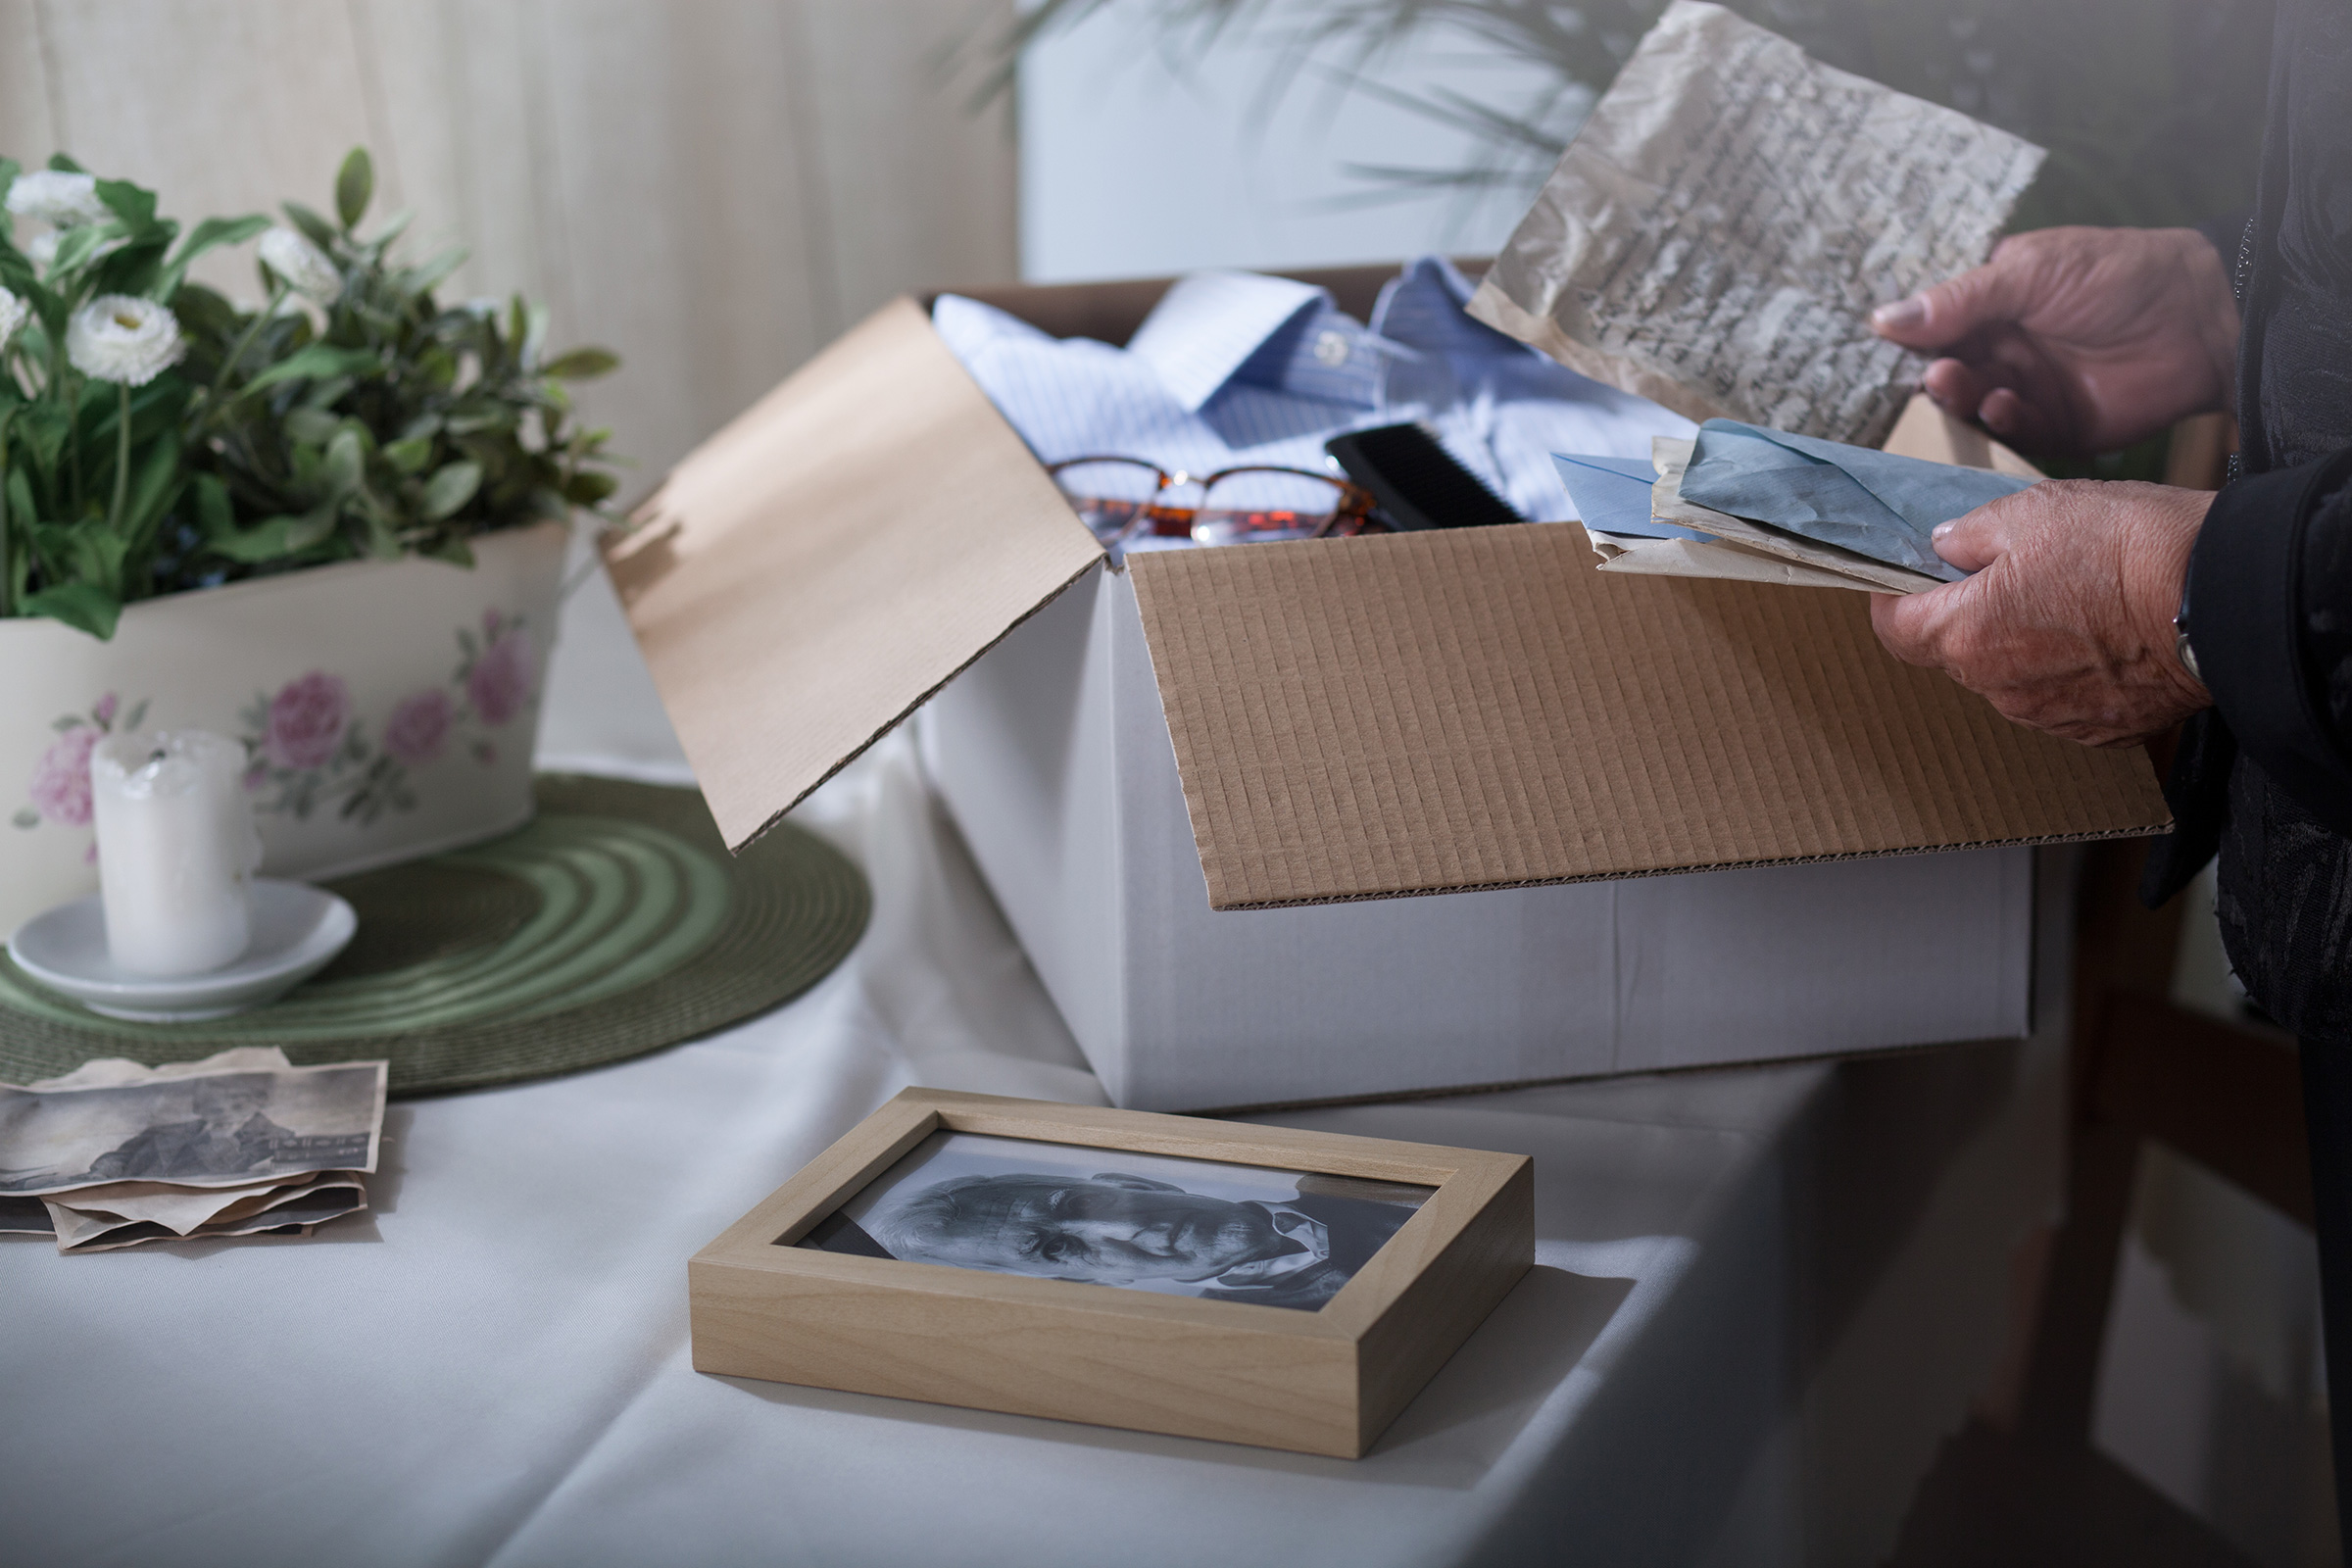 It may sound morbid, but creating a findable file, binder, cloud-based drive, or even shoebox where you store estate documents and meaningful personal effects will save your loved ones incalculable time, money, and suffering. (Getty Images/iStockphoto)